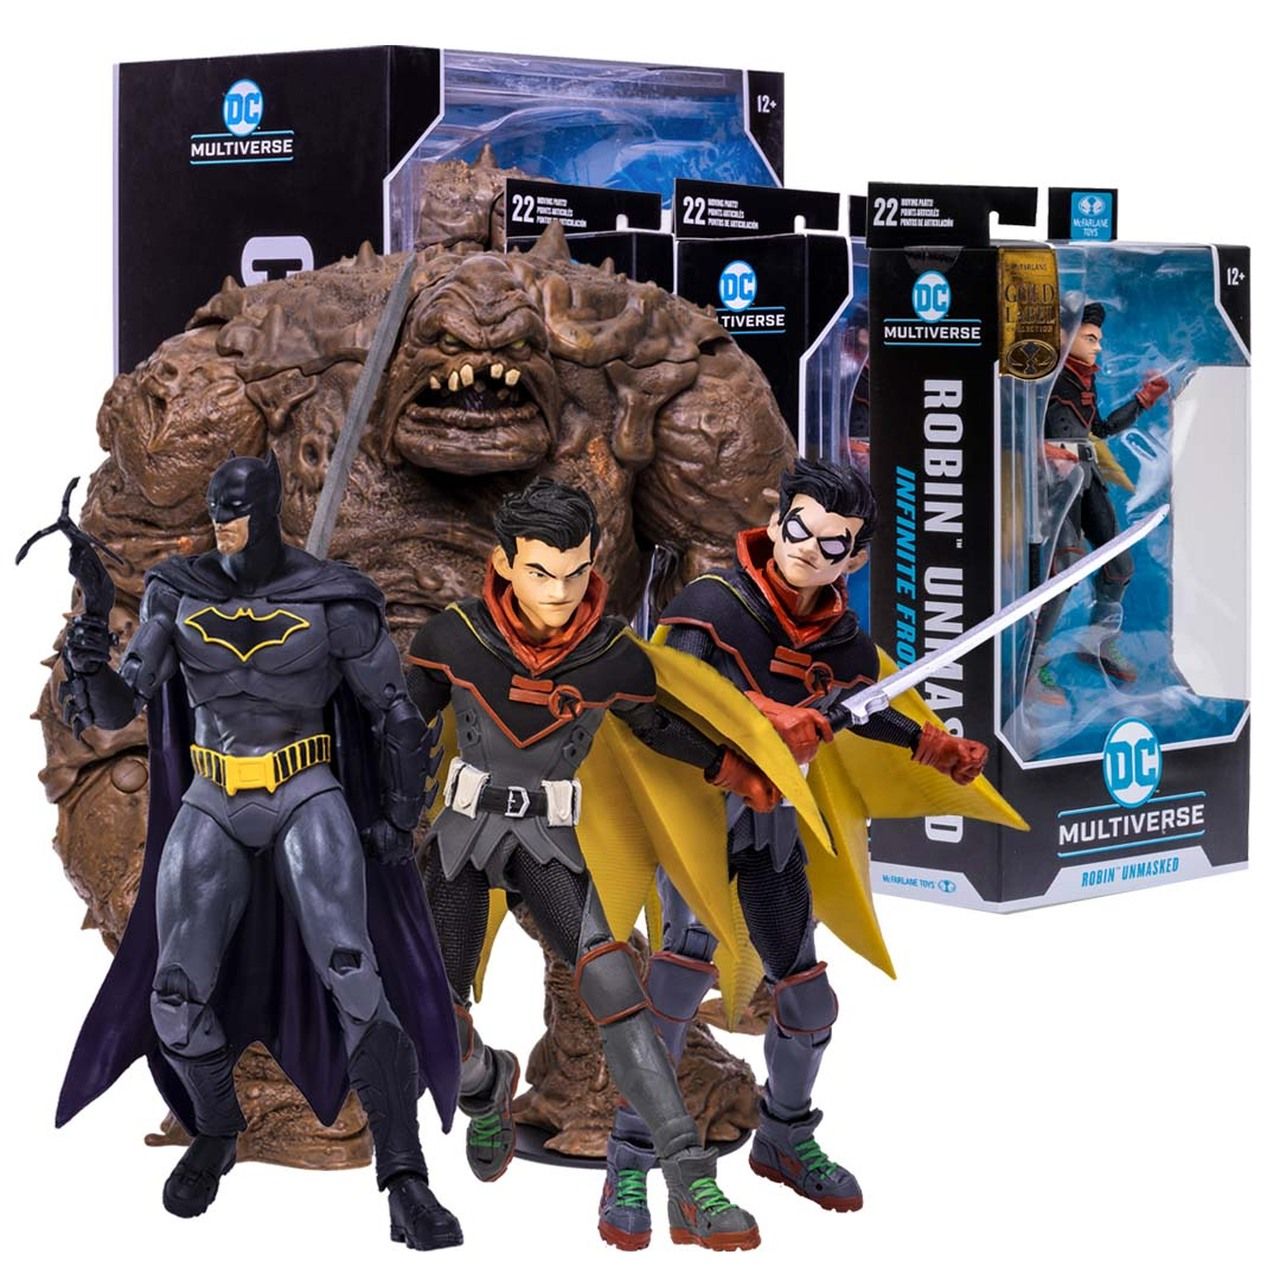 Robin, Robin (unmasked), Batman and Clayface are available to purchase in a bundle from McFarlane Toys.